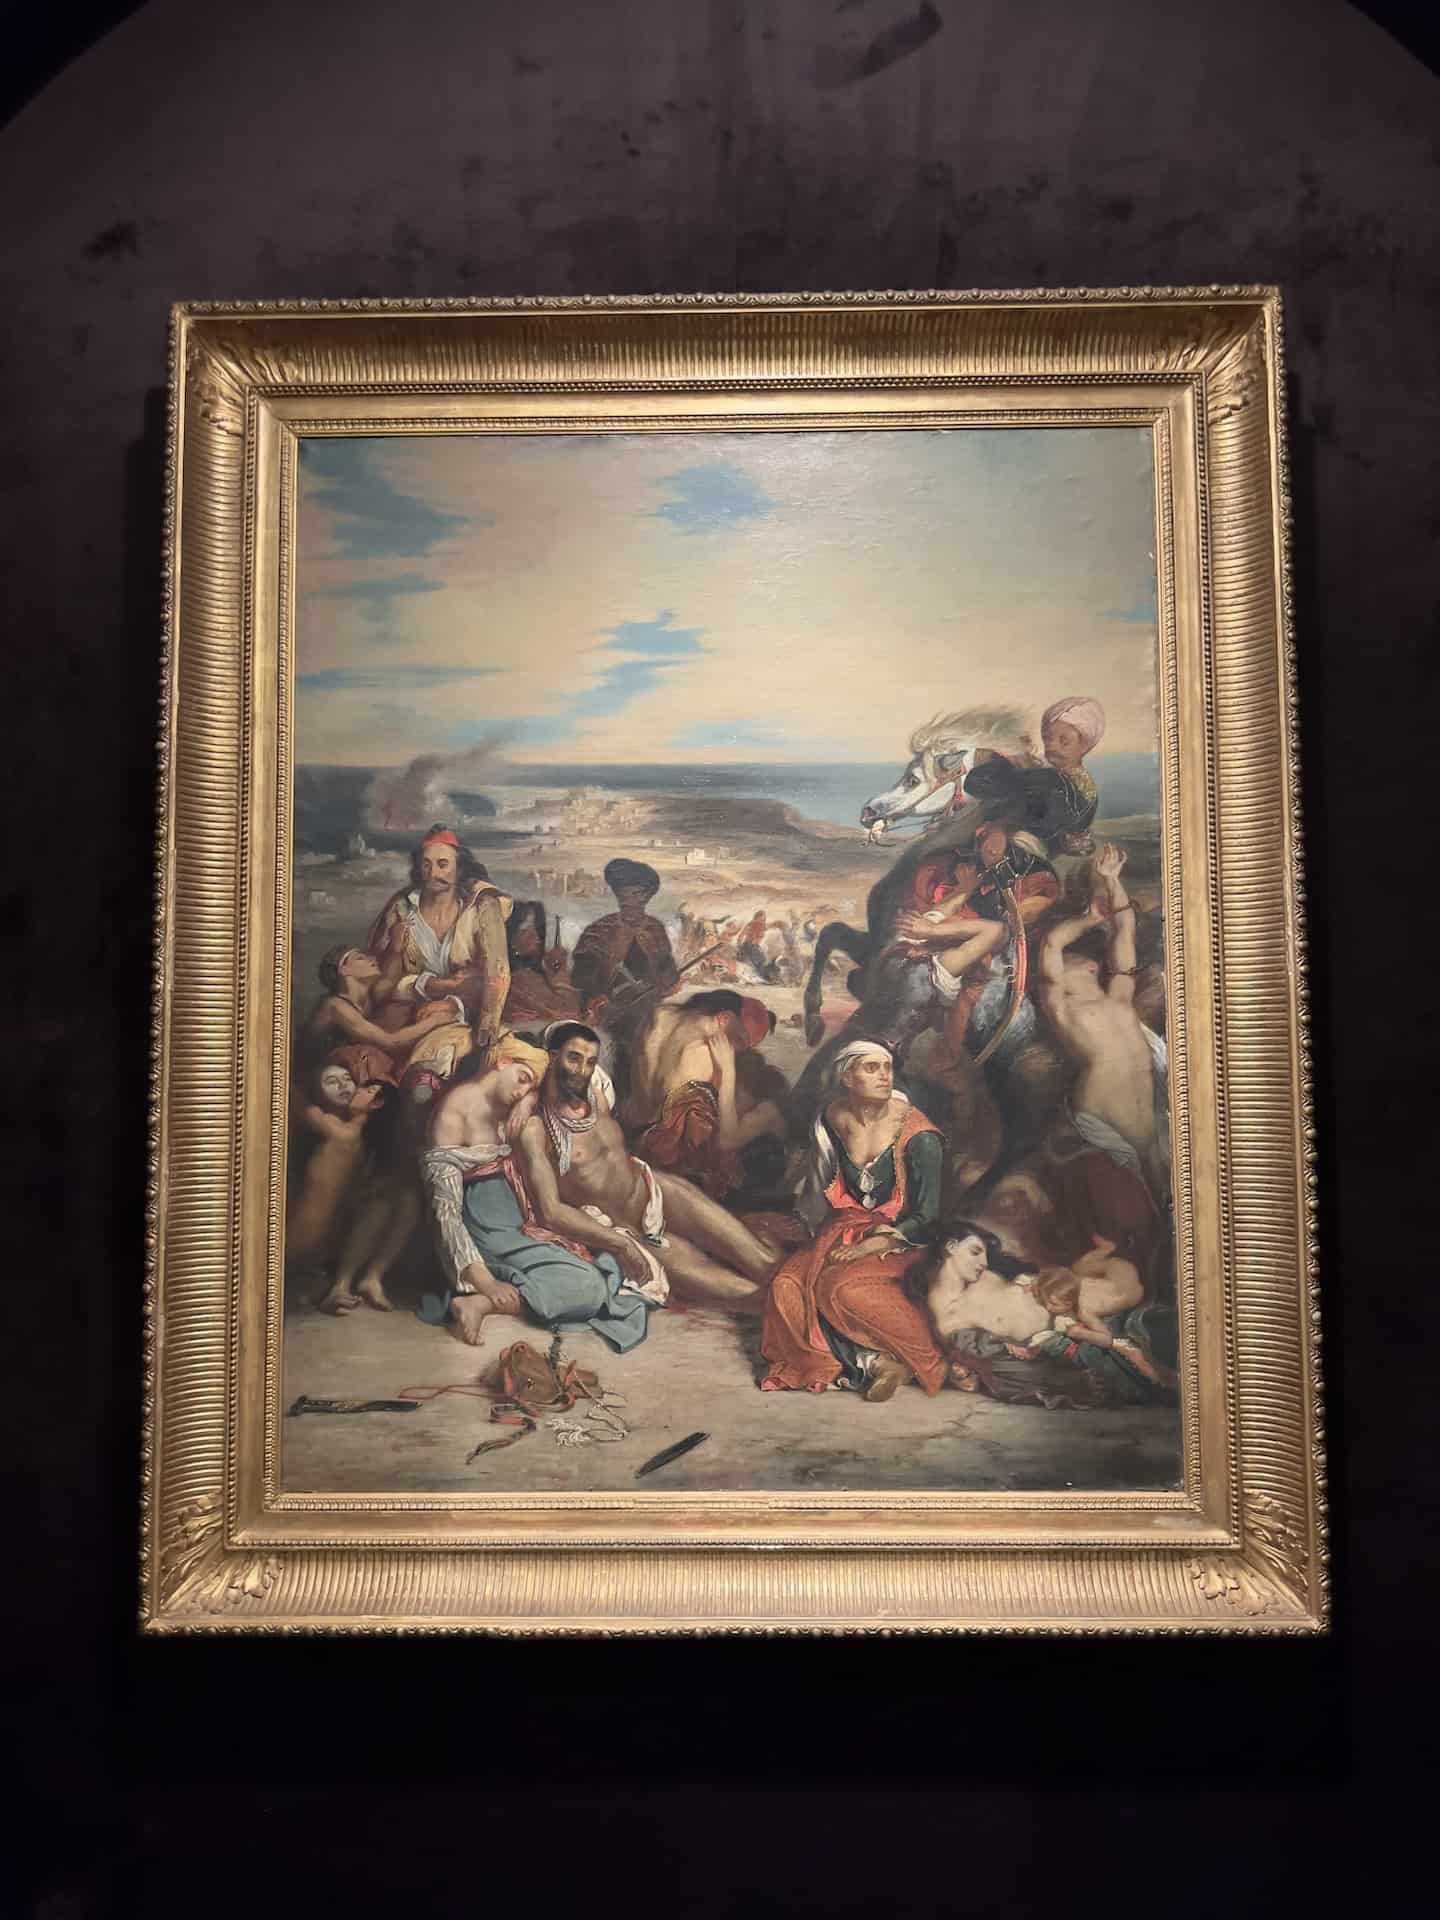 The Massacre at Chios, oil painting, copy of the work of French painter Eugène Delacroix (1798-1863), created in his workshop by his pupil, Pierre Andrieu (1821-1892) at the War Museum in Athens, Greece